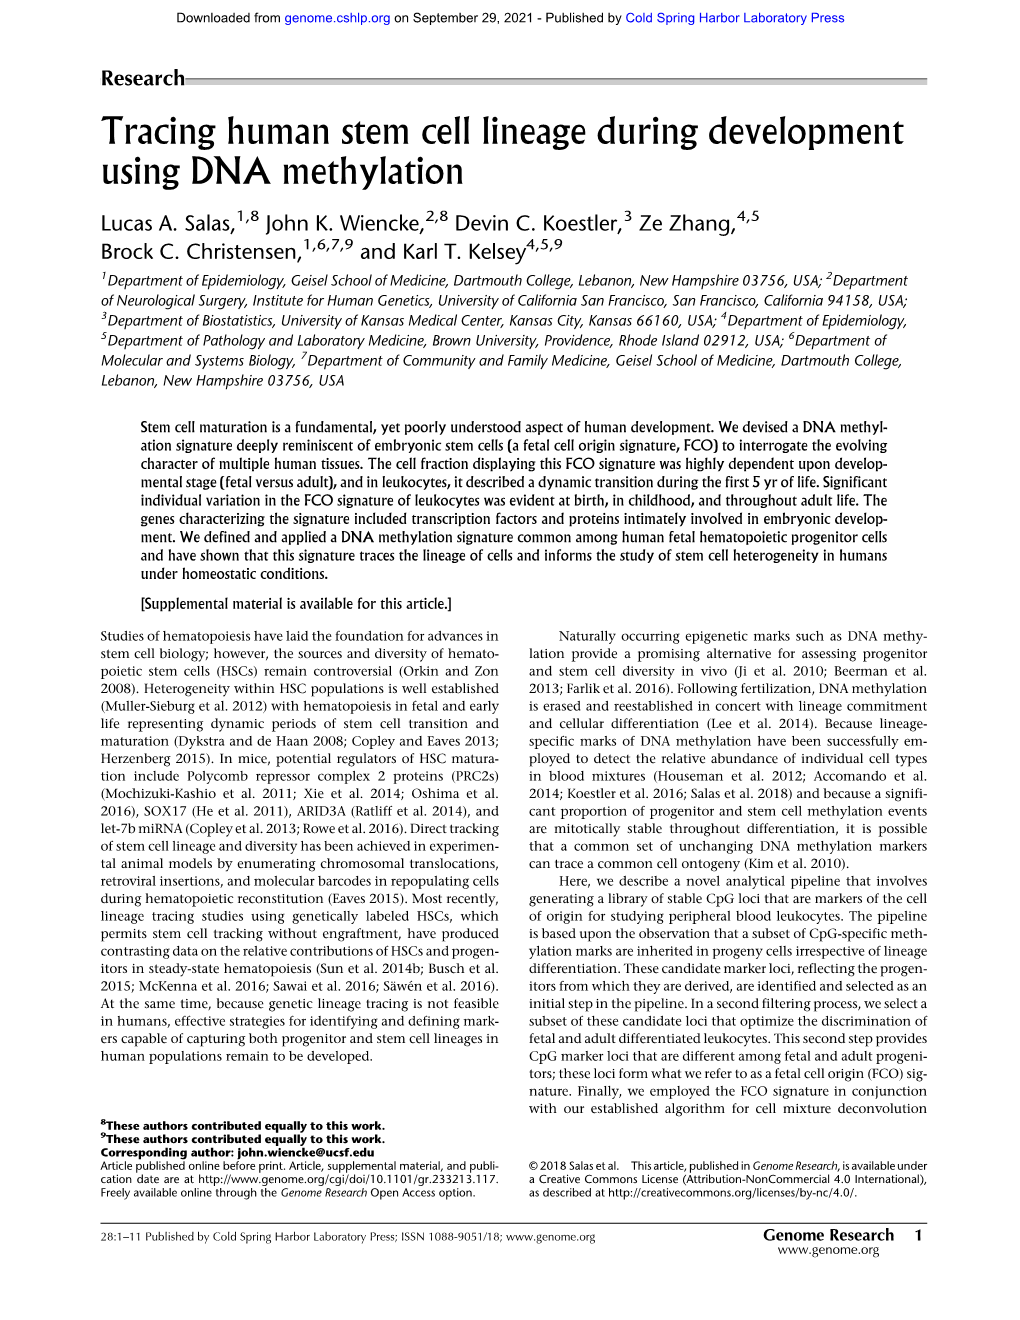 Tracing Human Stem Cell Lineage During Development Using DNA Methylation